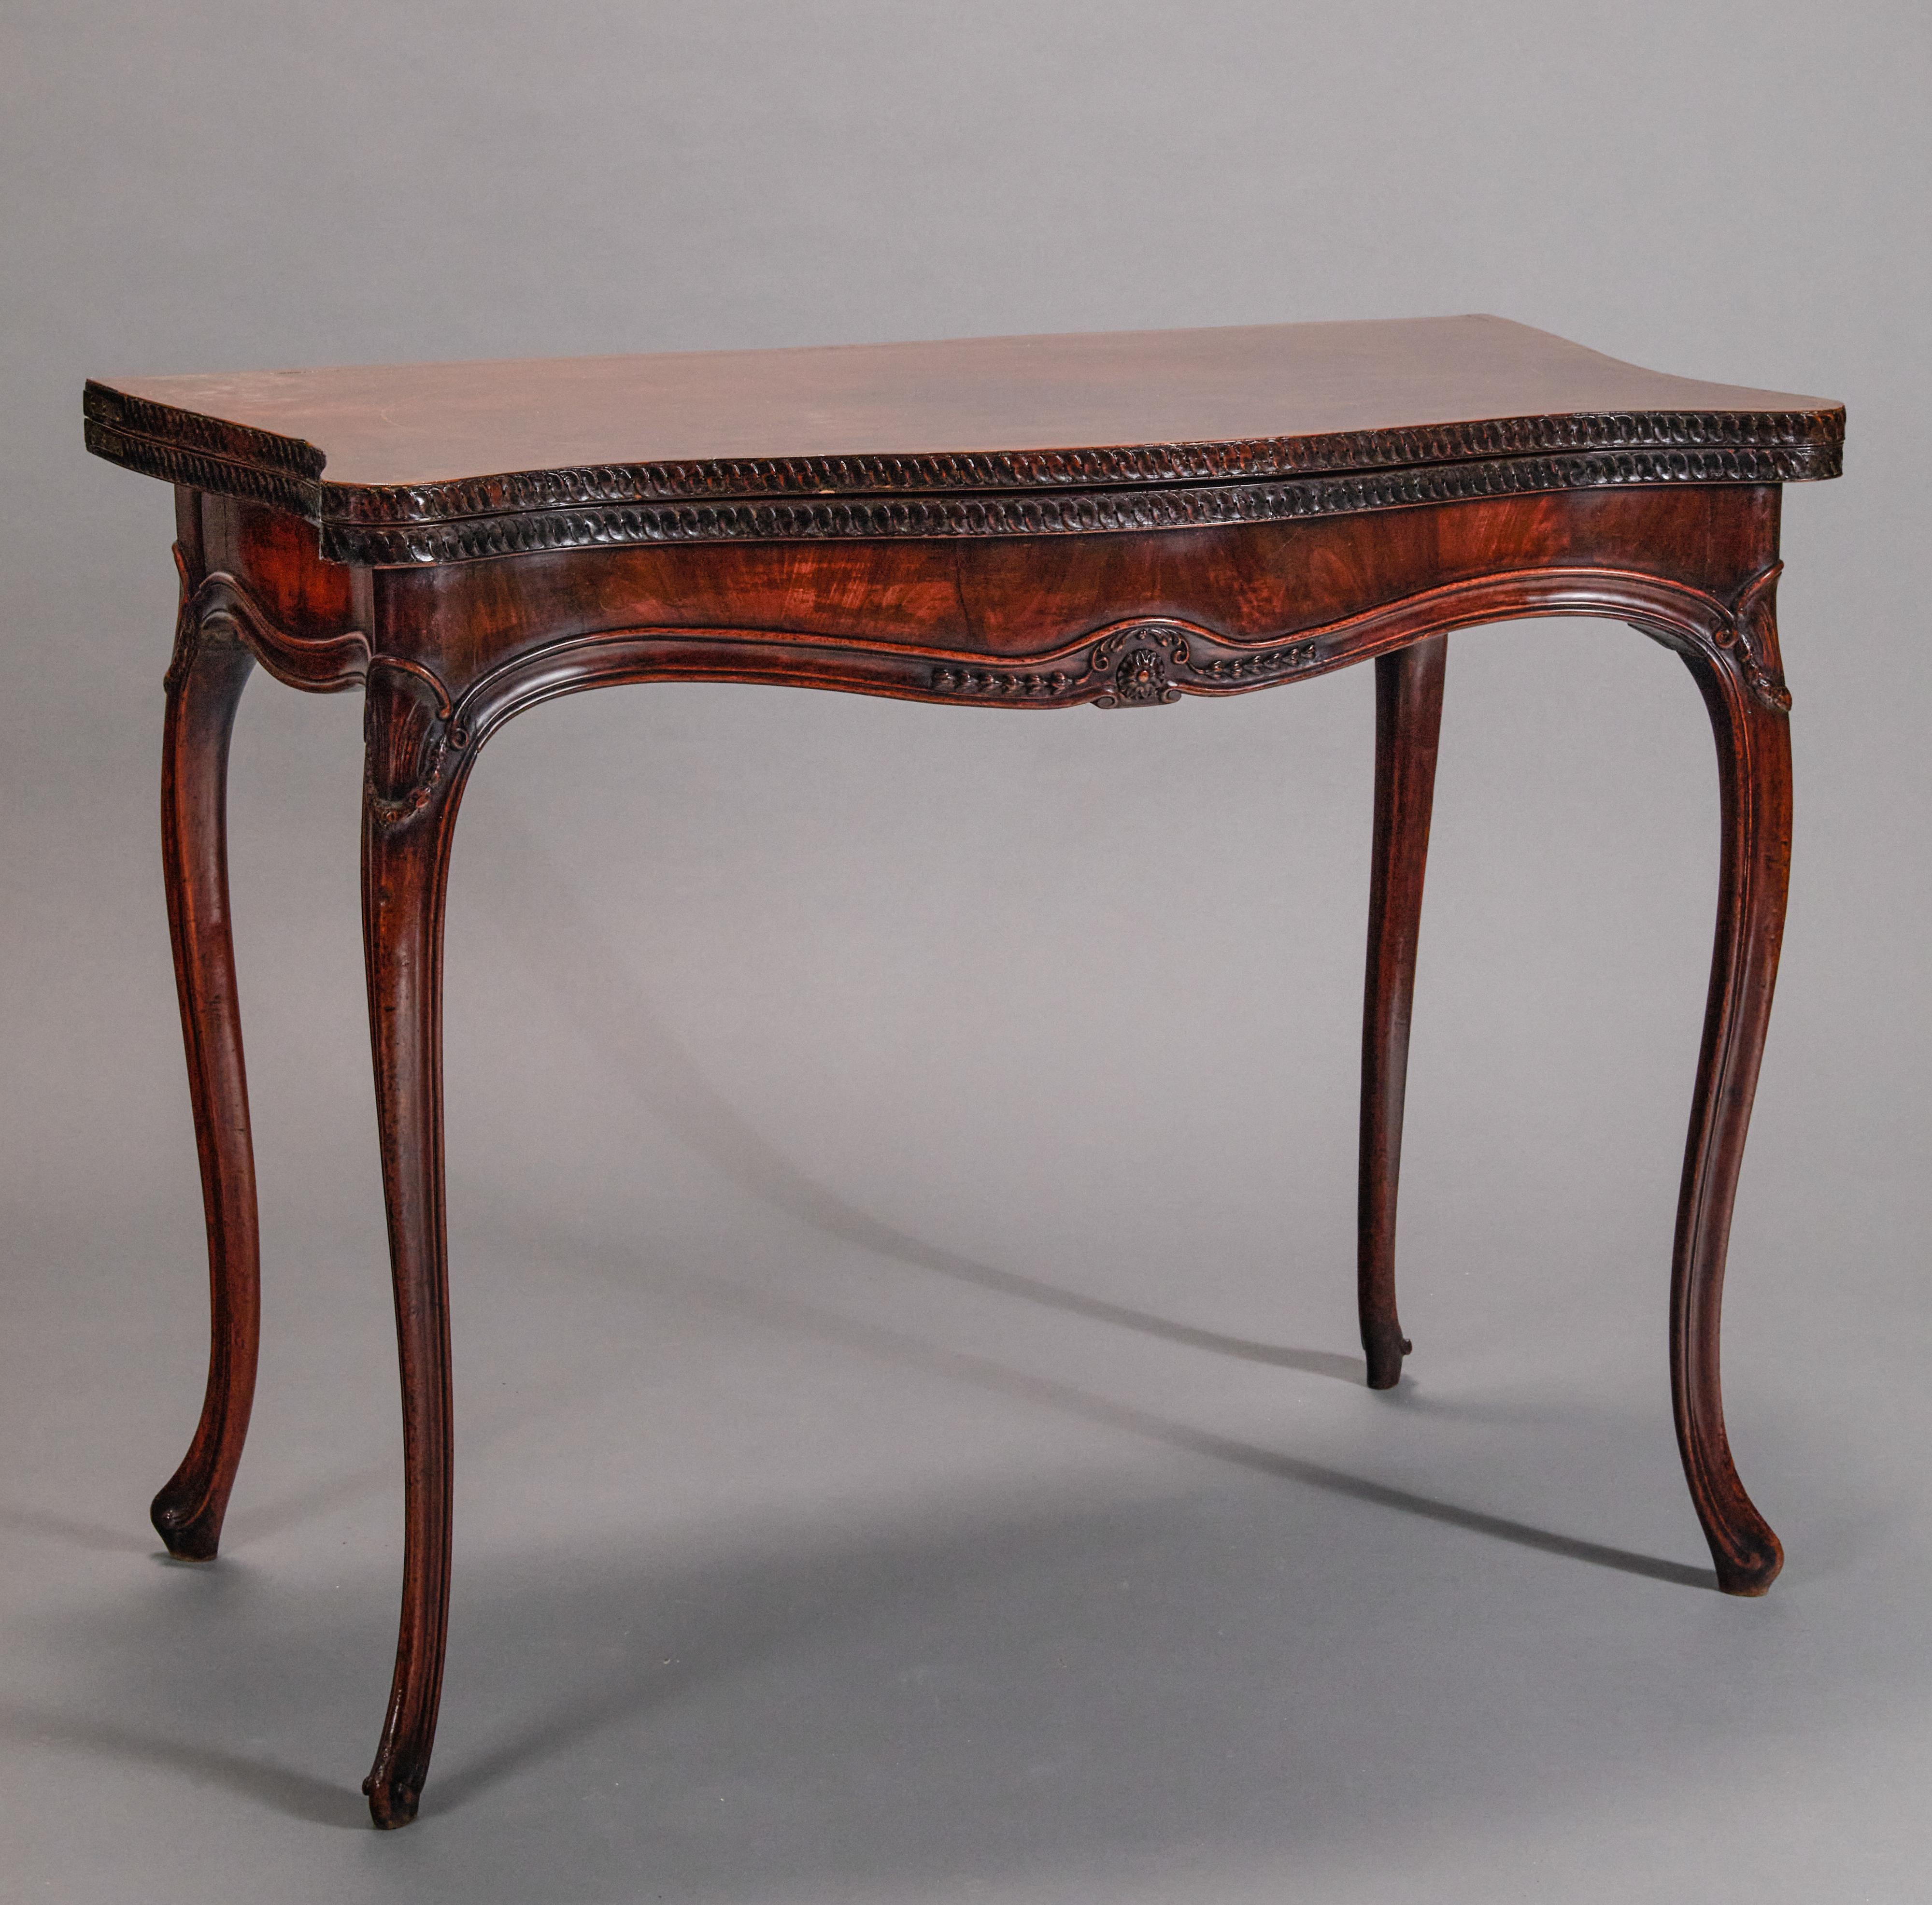 Rectangular, marquetry banded, fold-over top enclosing a leather playing surface with gold trim design. In french taste after a design by George Hepplewhite. When hinged top is open it measures 35 1/4